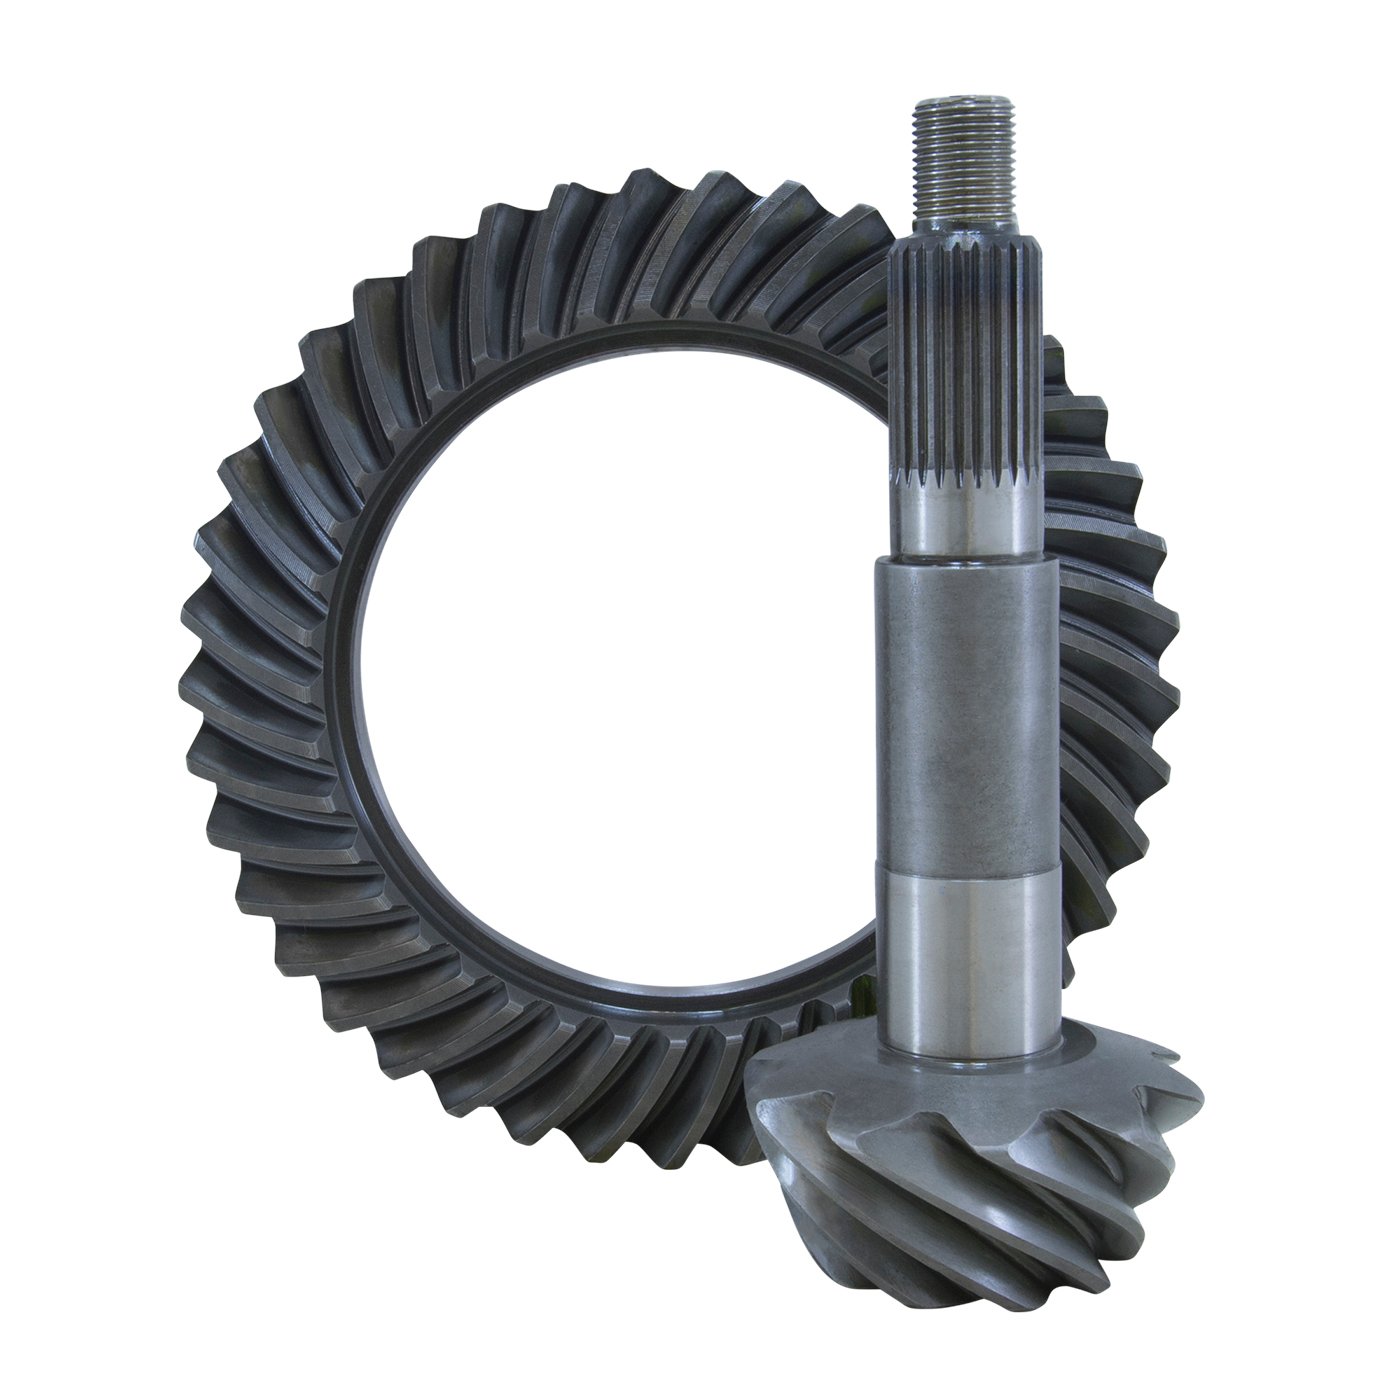 USA Standard ZG D44-392 Replacement Ring & Pinion